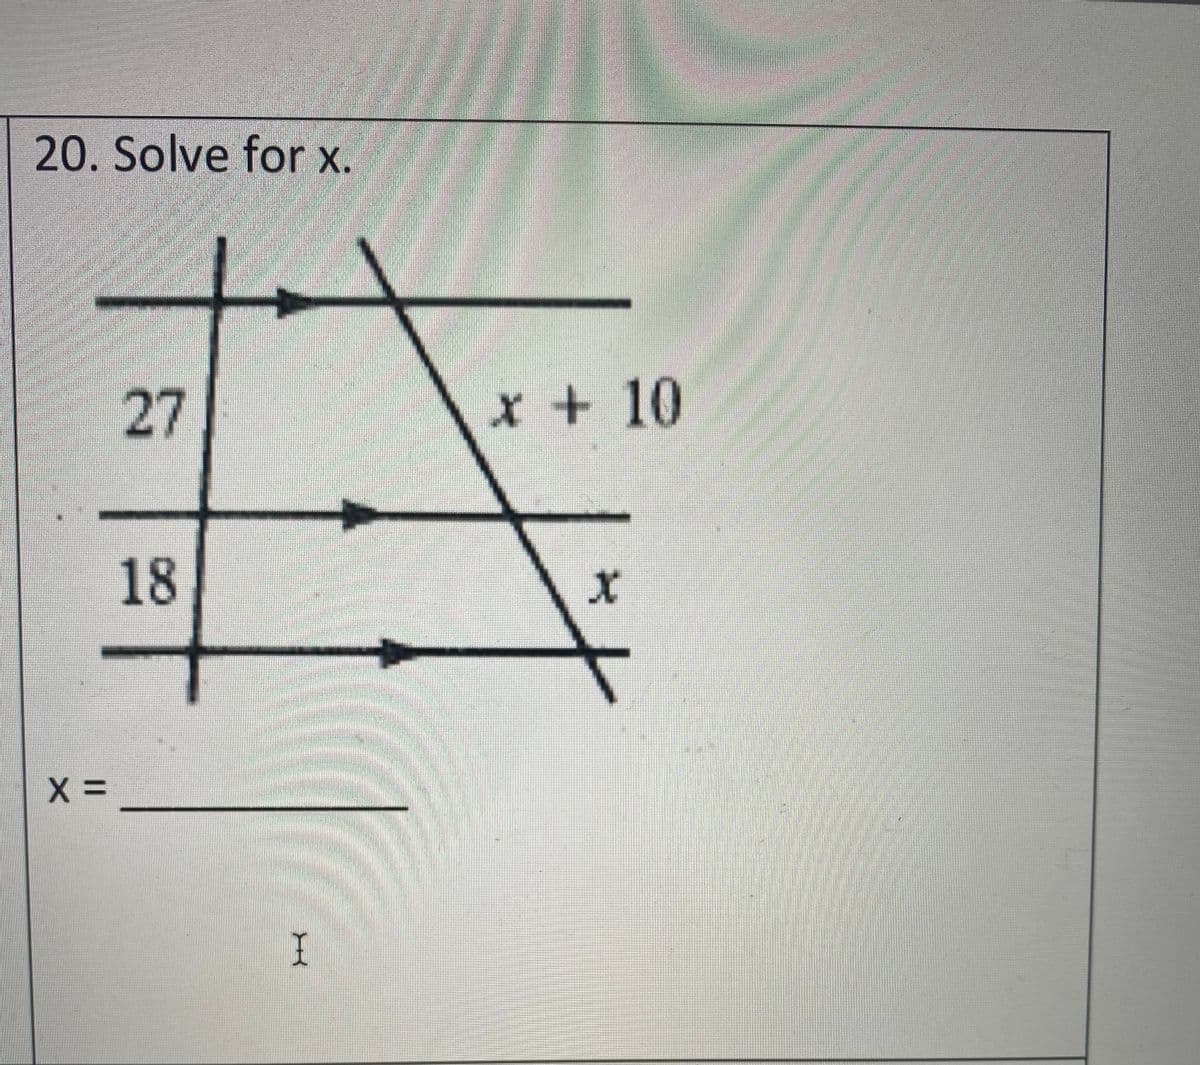 20. Solve for x.
27
x + 10
18
